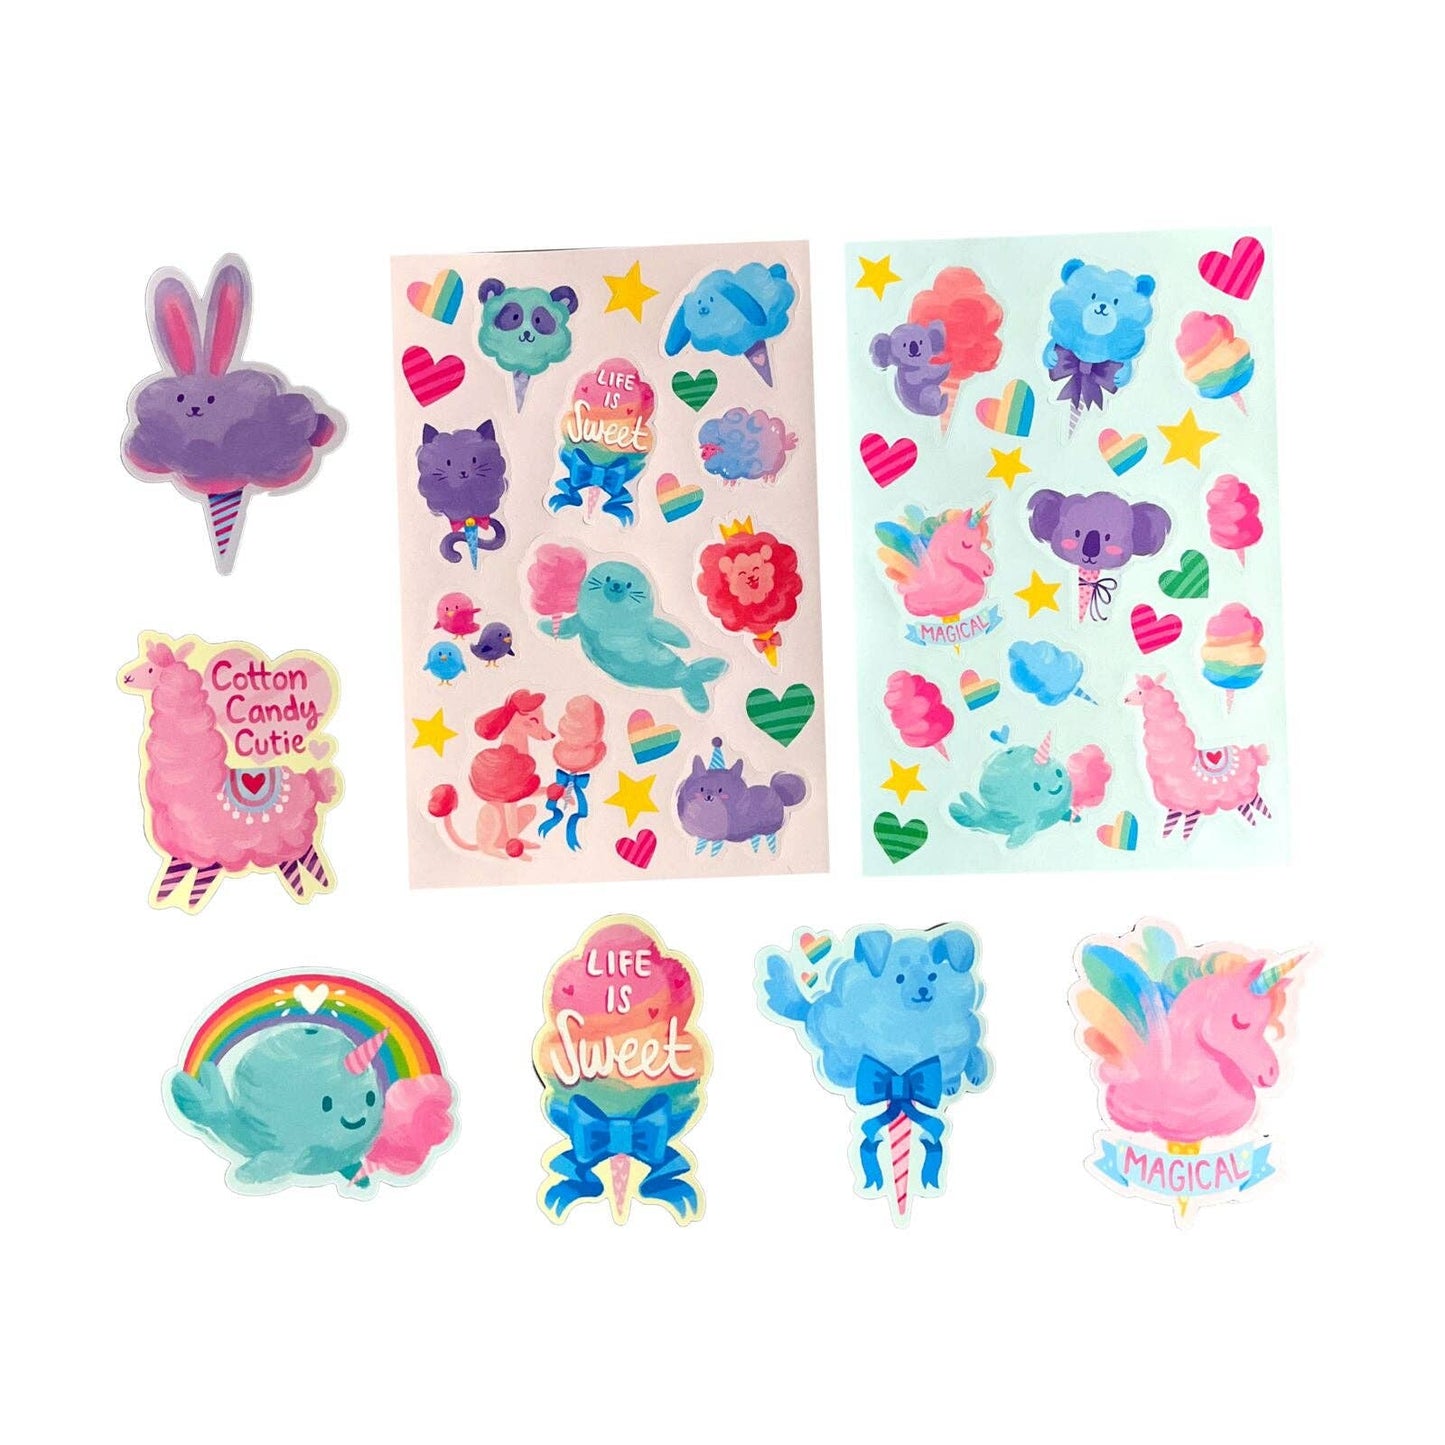 Cotton Candy Scented Stickers